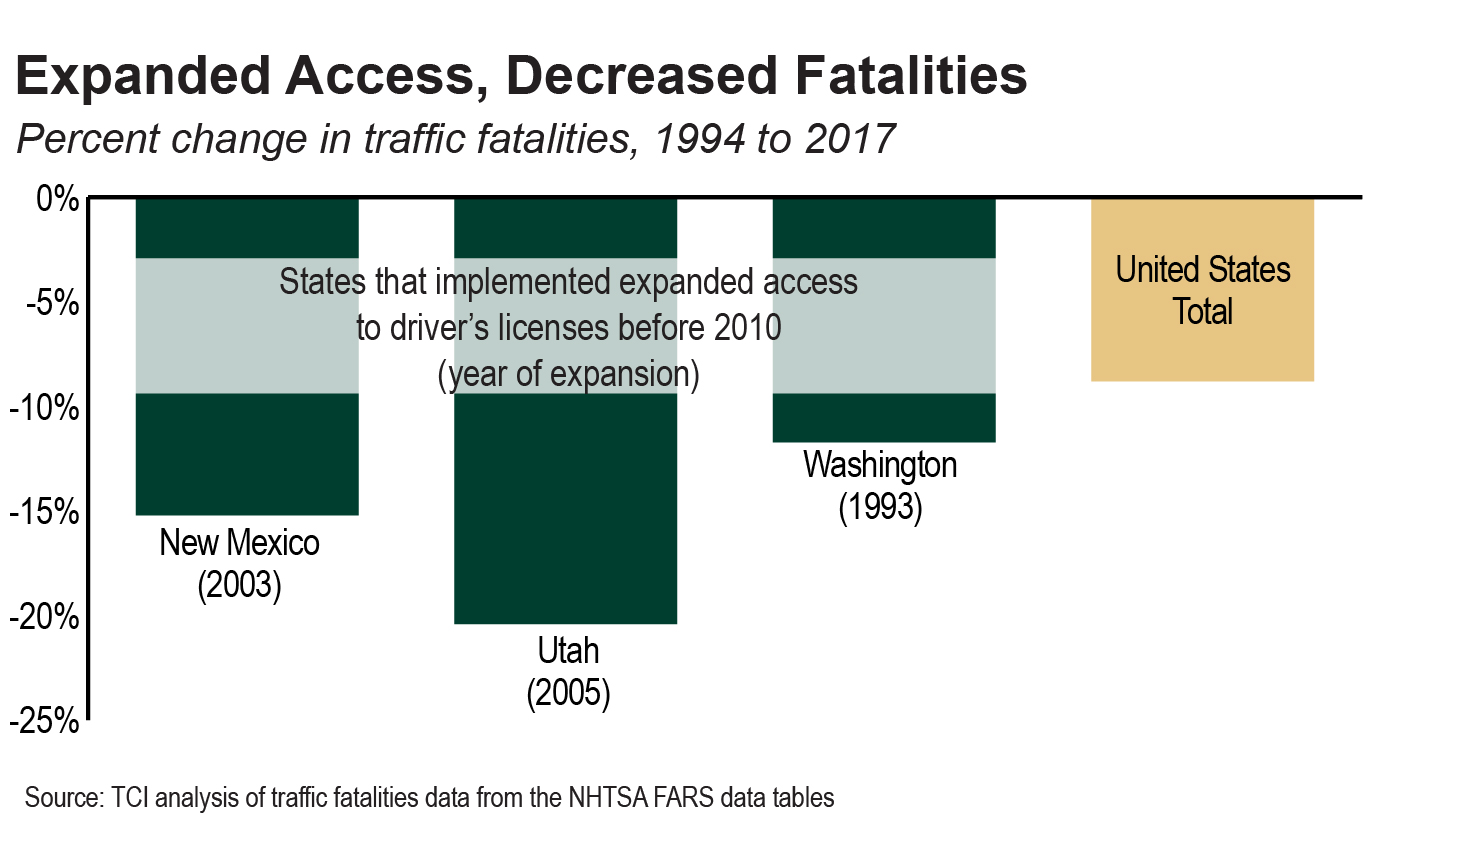 Bar graph showing percent change in traffic fatalities from 1994 to 2017 in certain states that implemented expanded access to driver's licenses before 2010